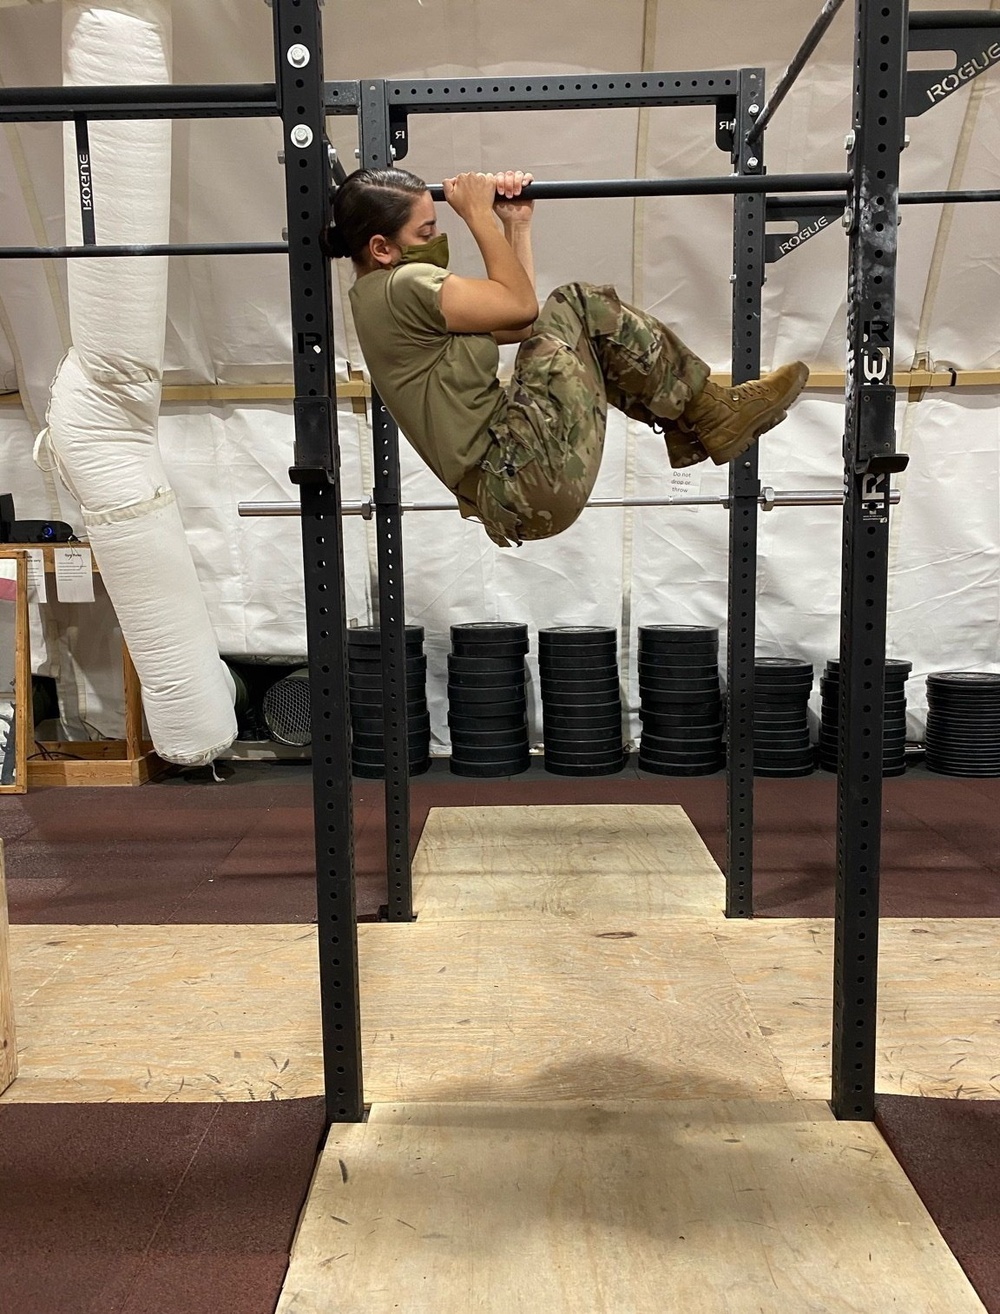 Task Force Illini Soldiers prepare for the new Army fitness test